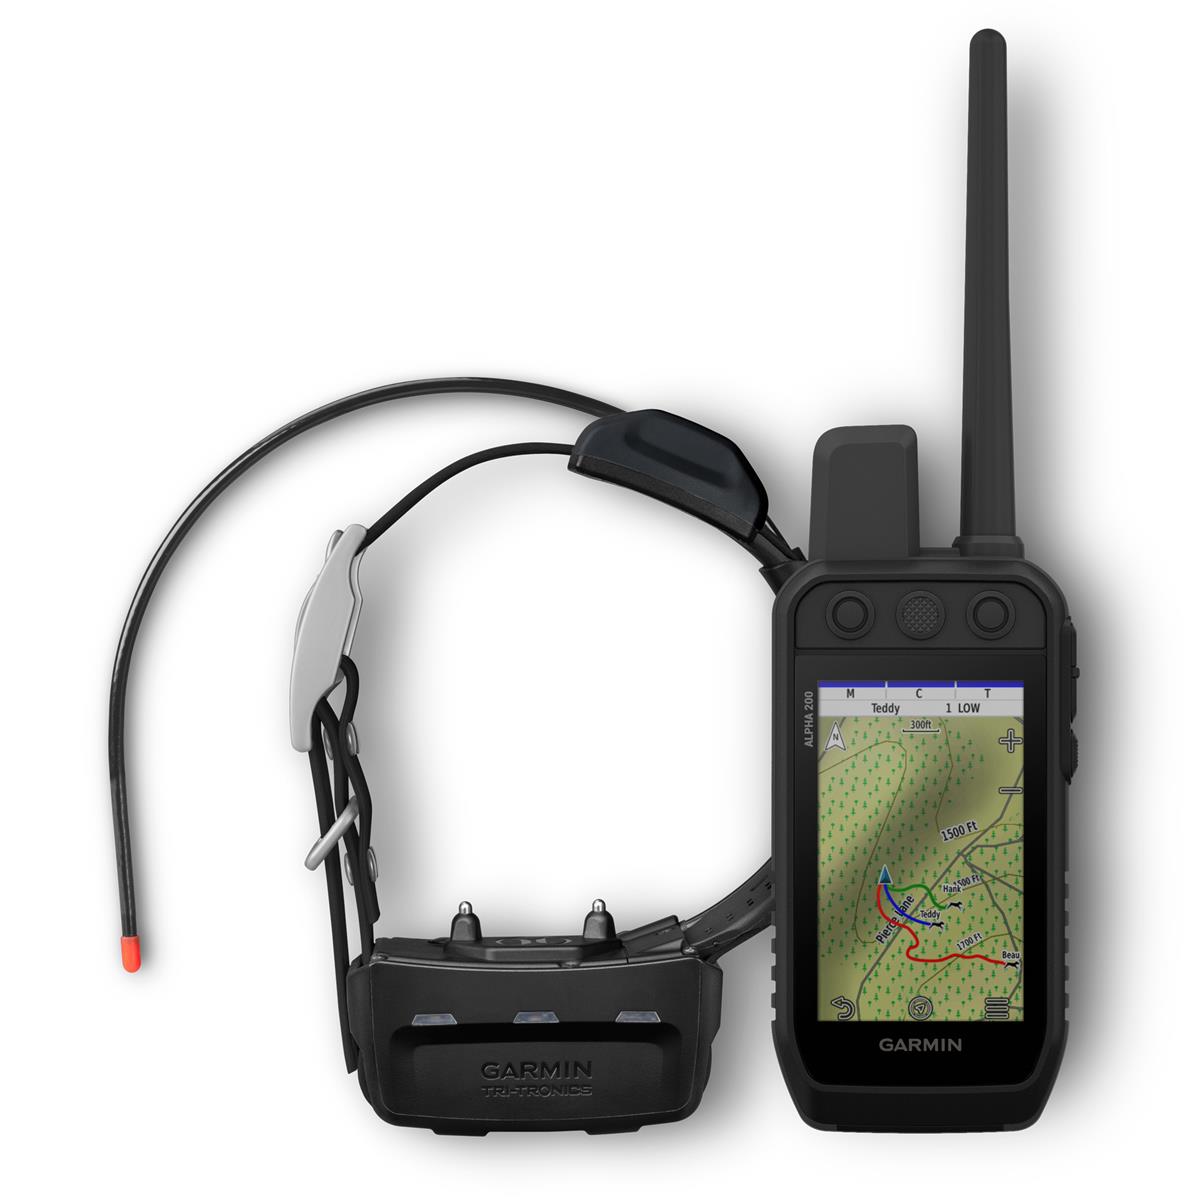 Image of Garmin Alpha 200 Handheld Multi-Dog Tracker and Trainer with TT 15X Dog Device